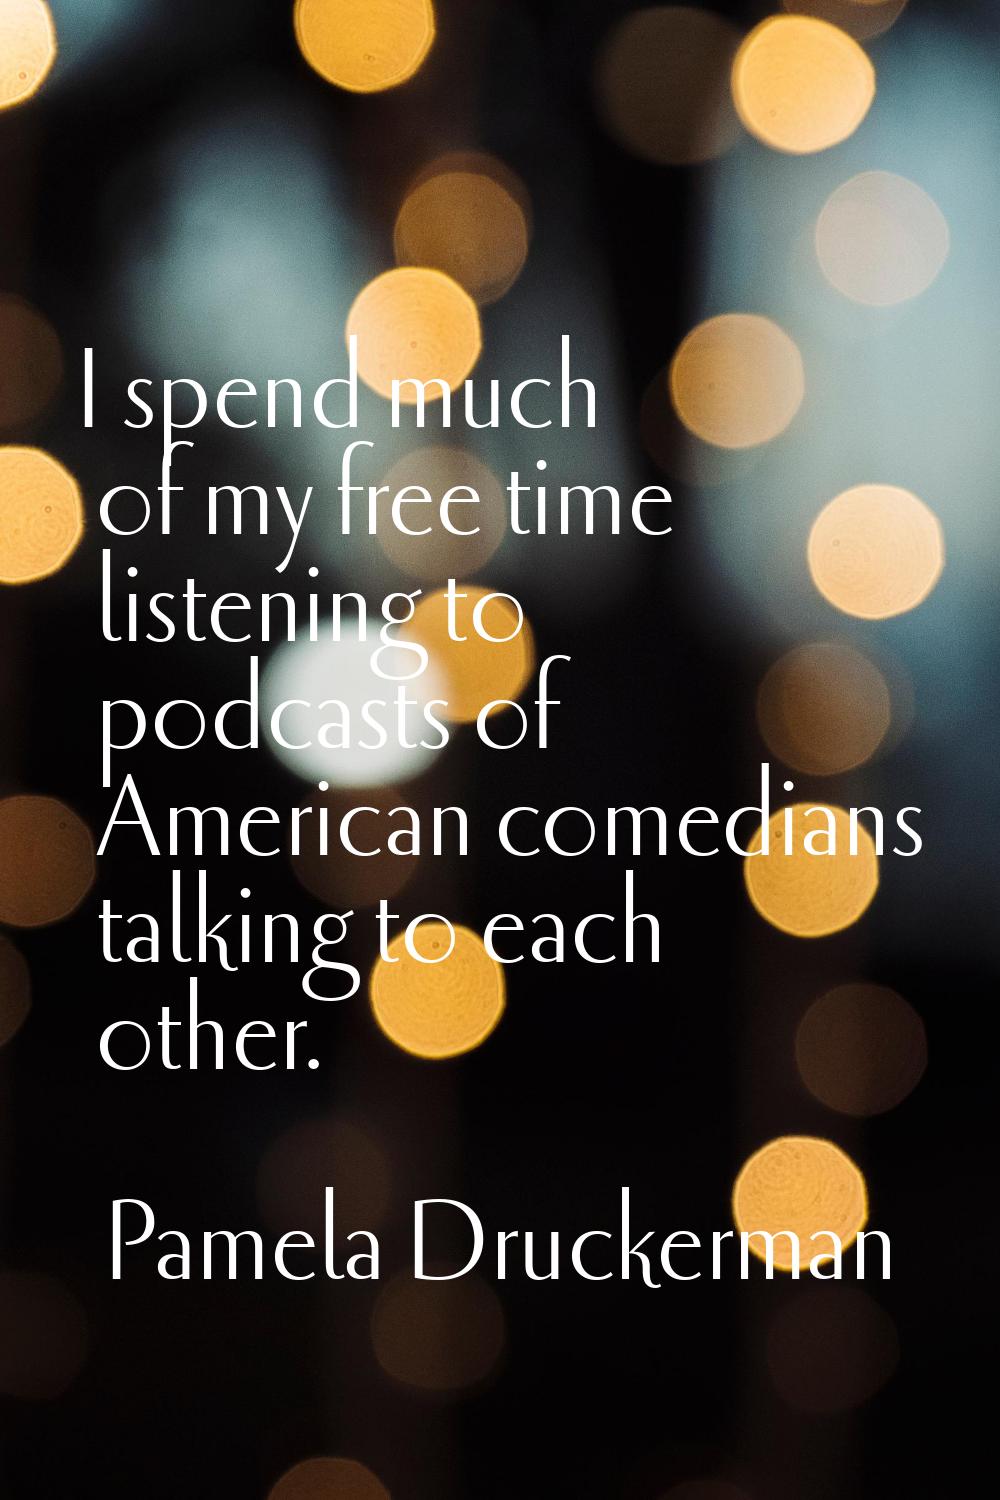 I spend much of my free time listening to podcasts of American comedians talking to each other.